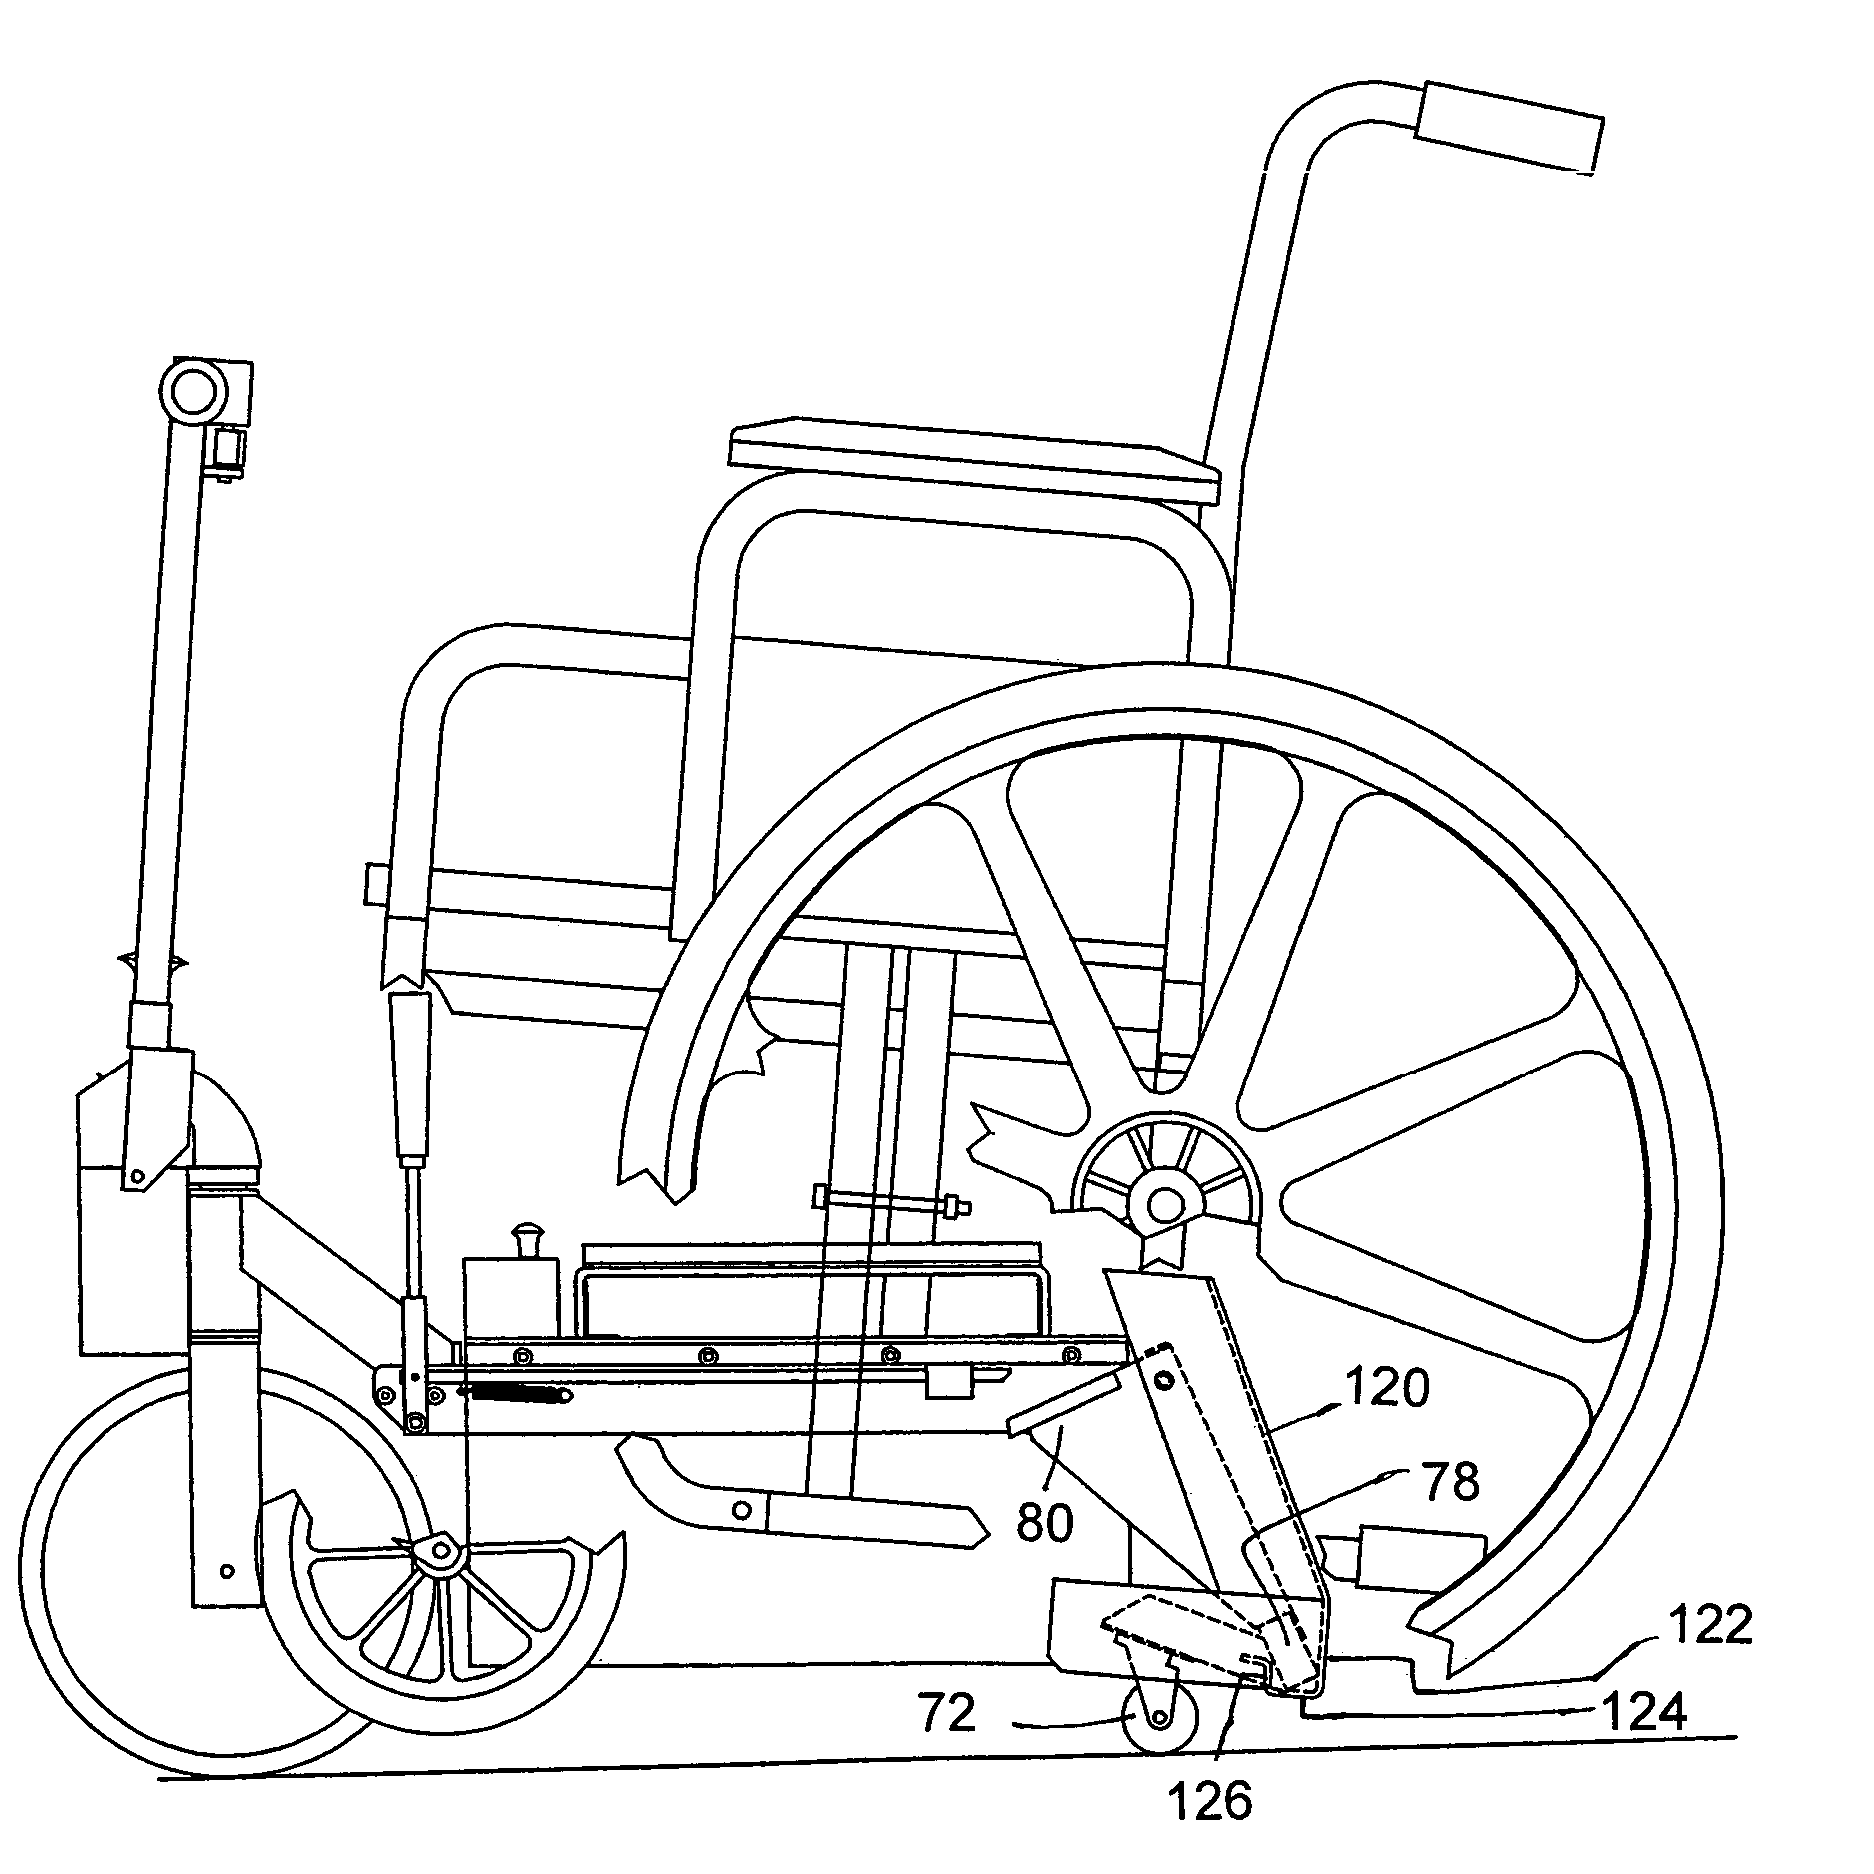 Wheel chair apparatus and method